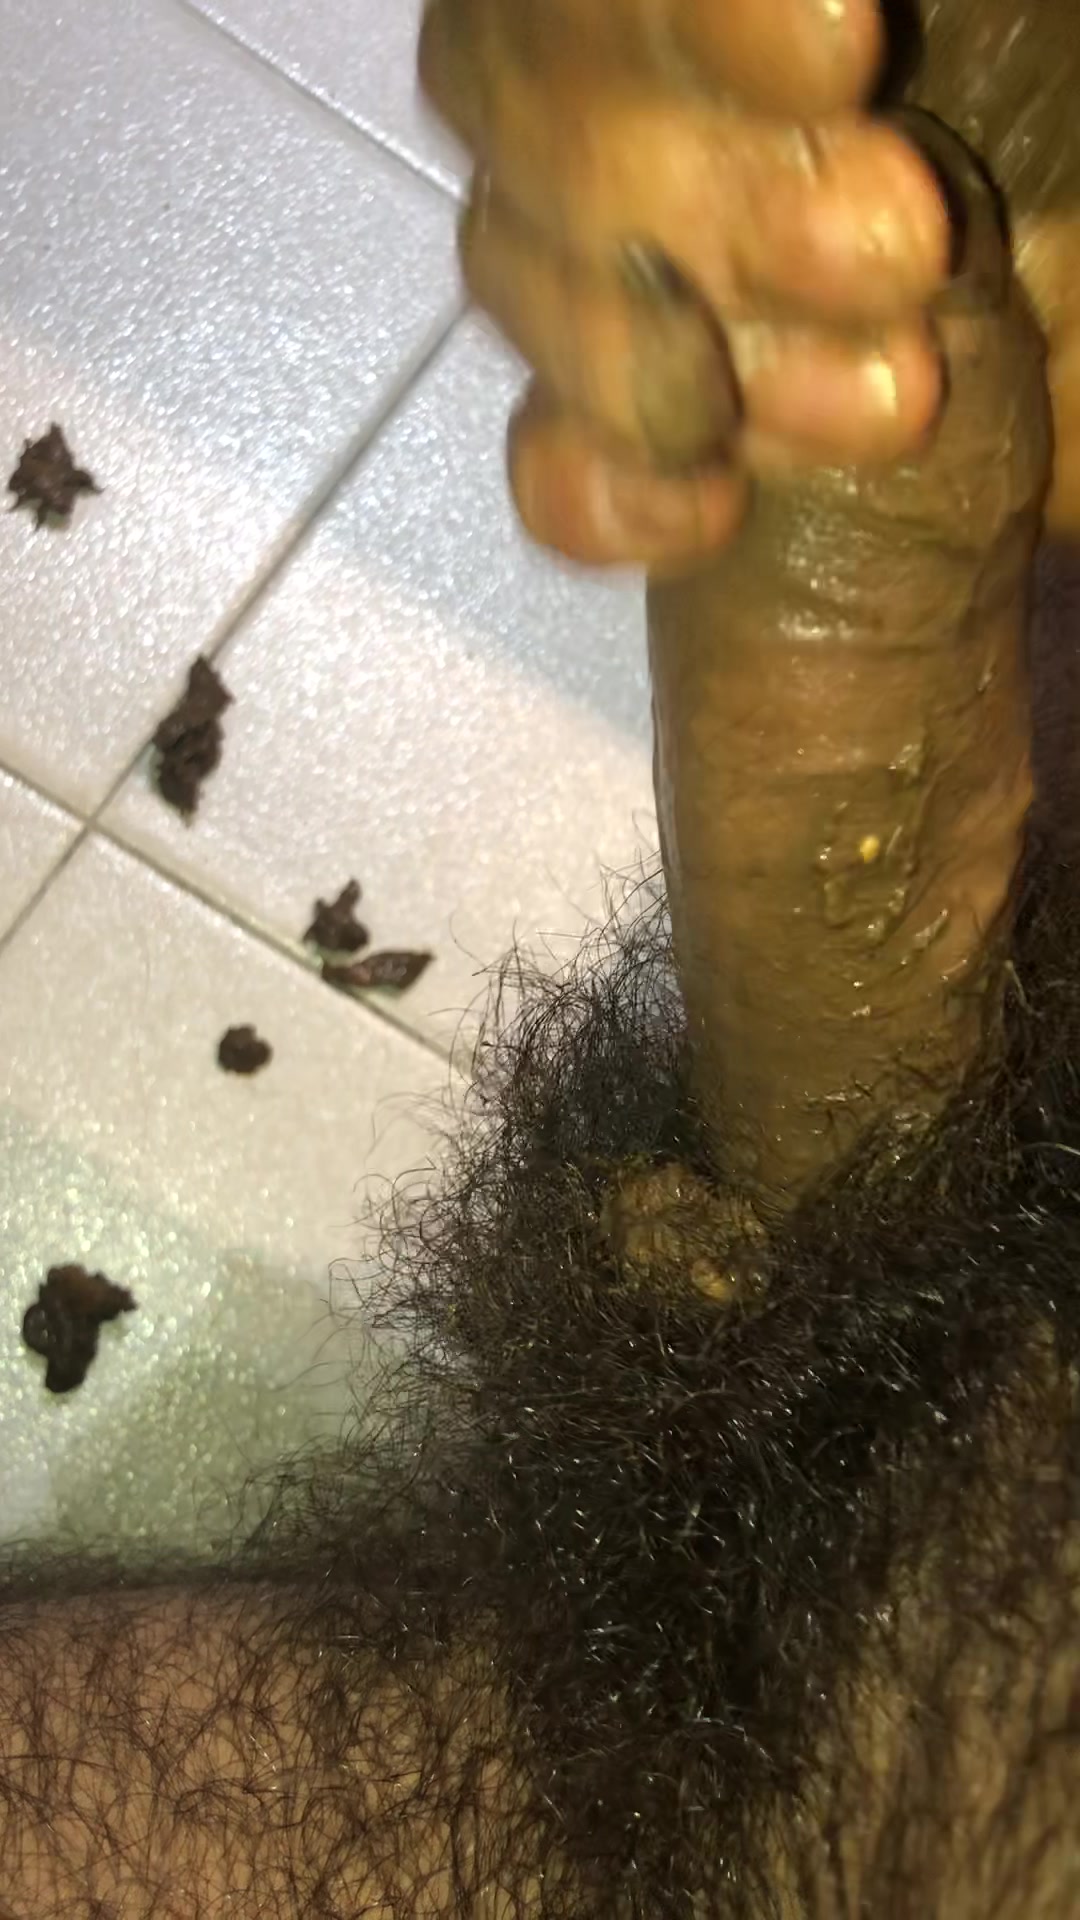 jerking my hairy cock with dark shit